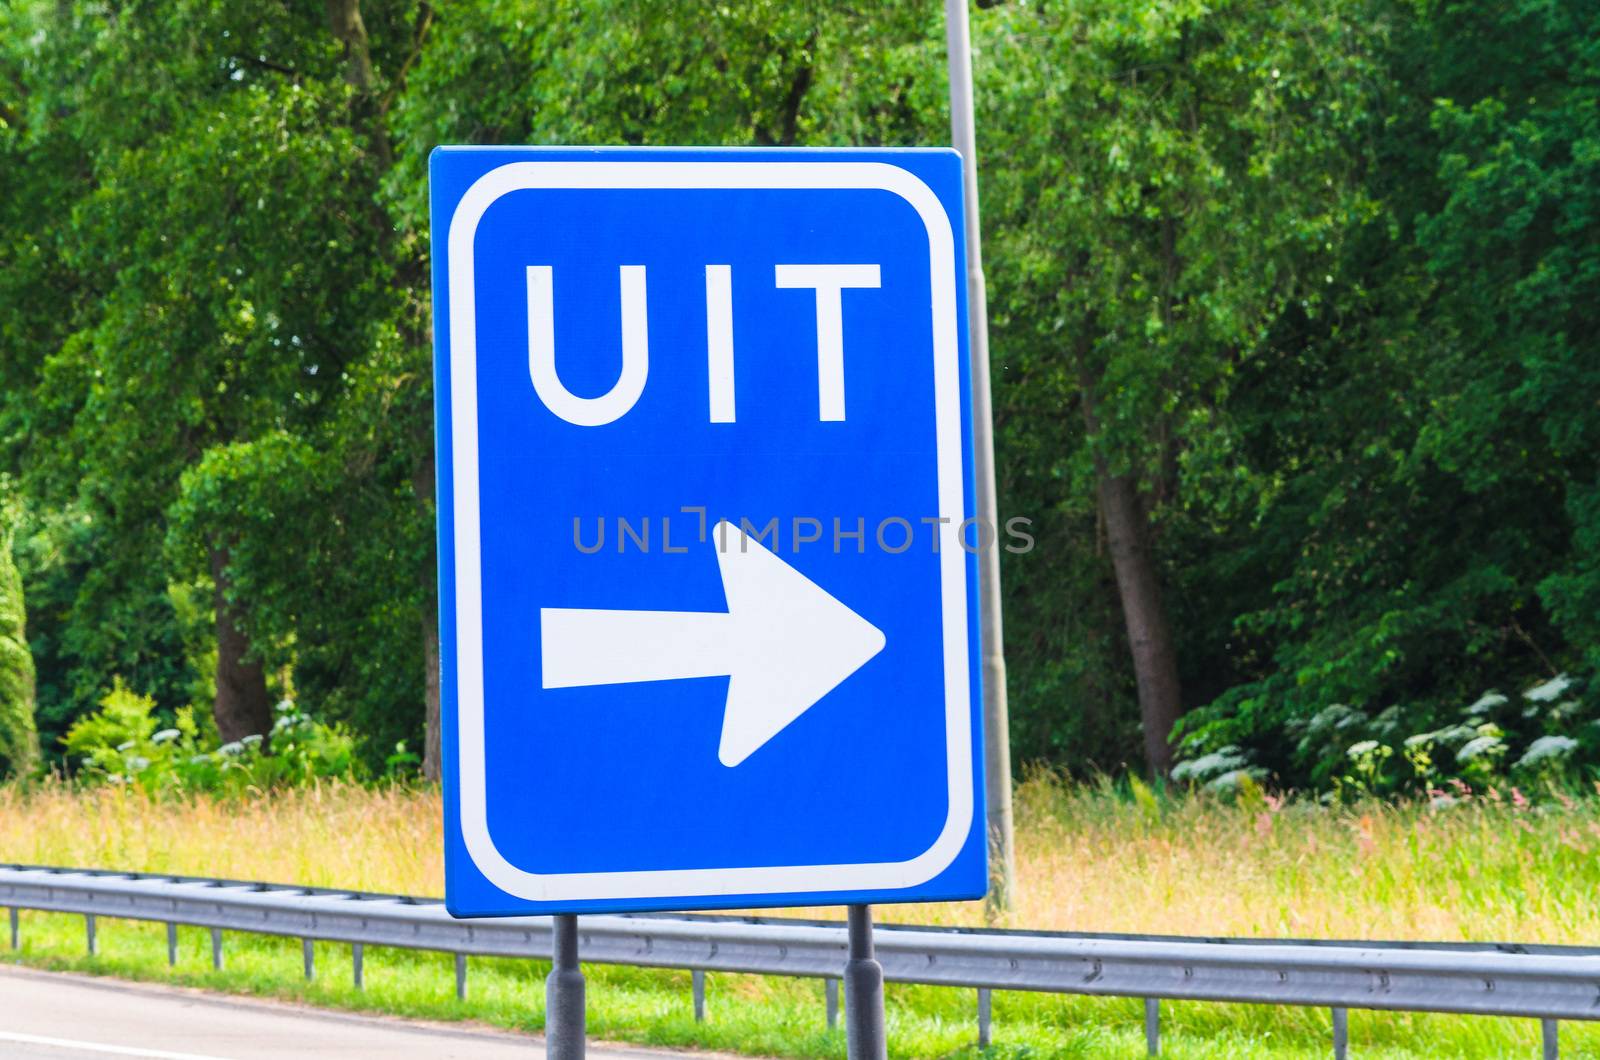 Uit, Dutch motorway traffic signs for Exit at.